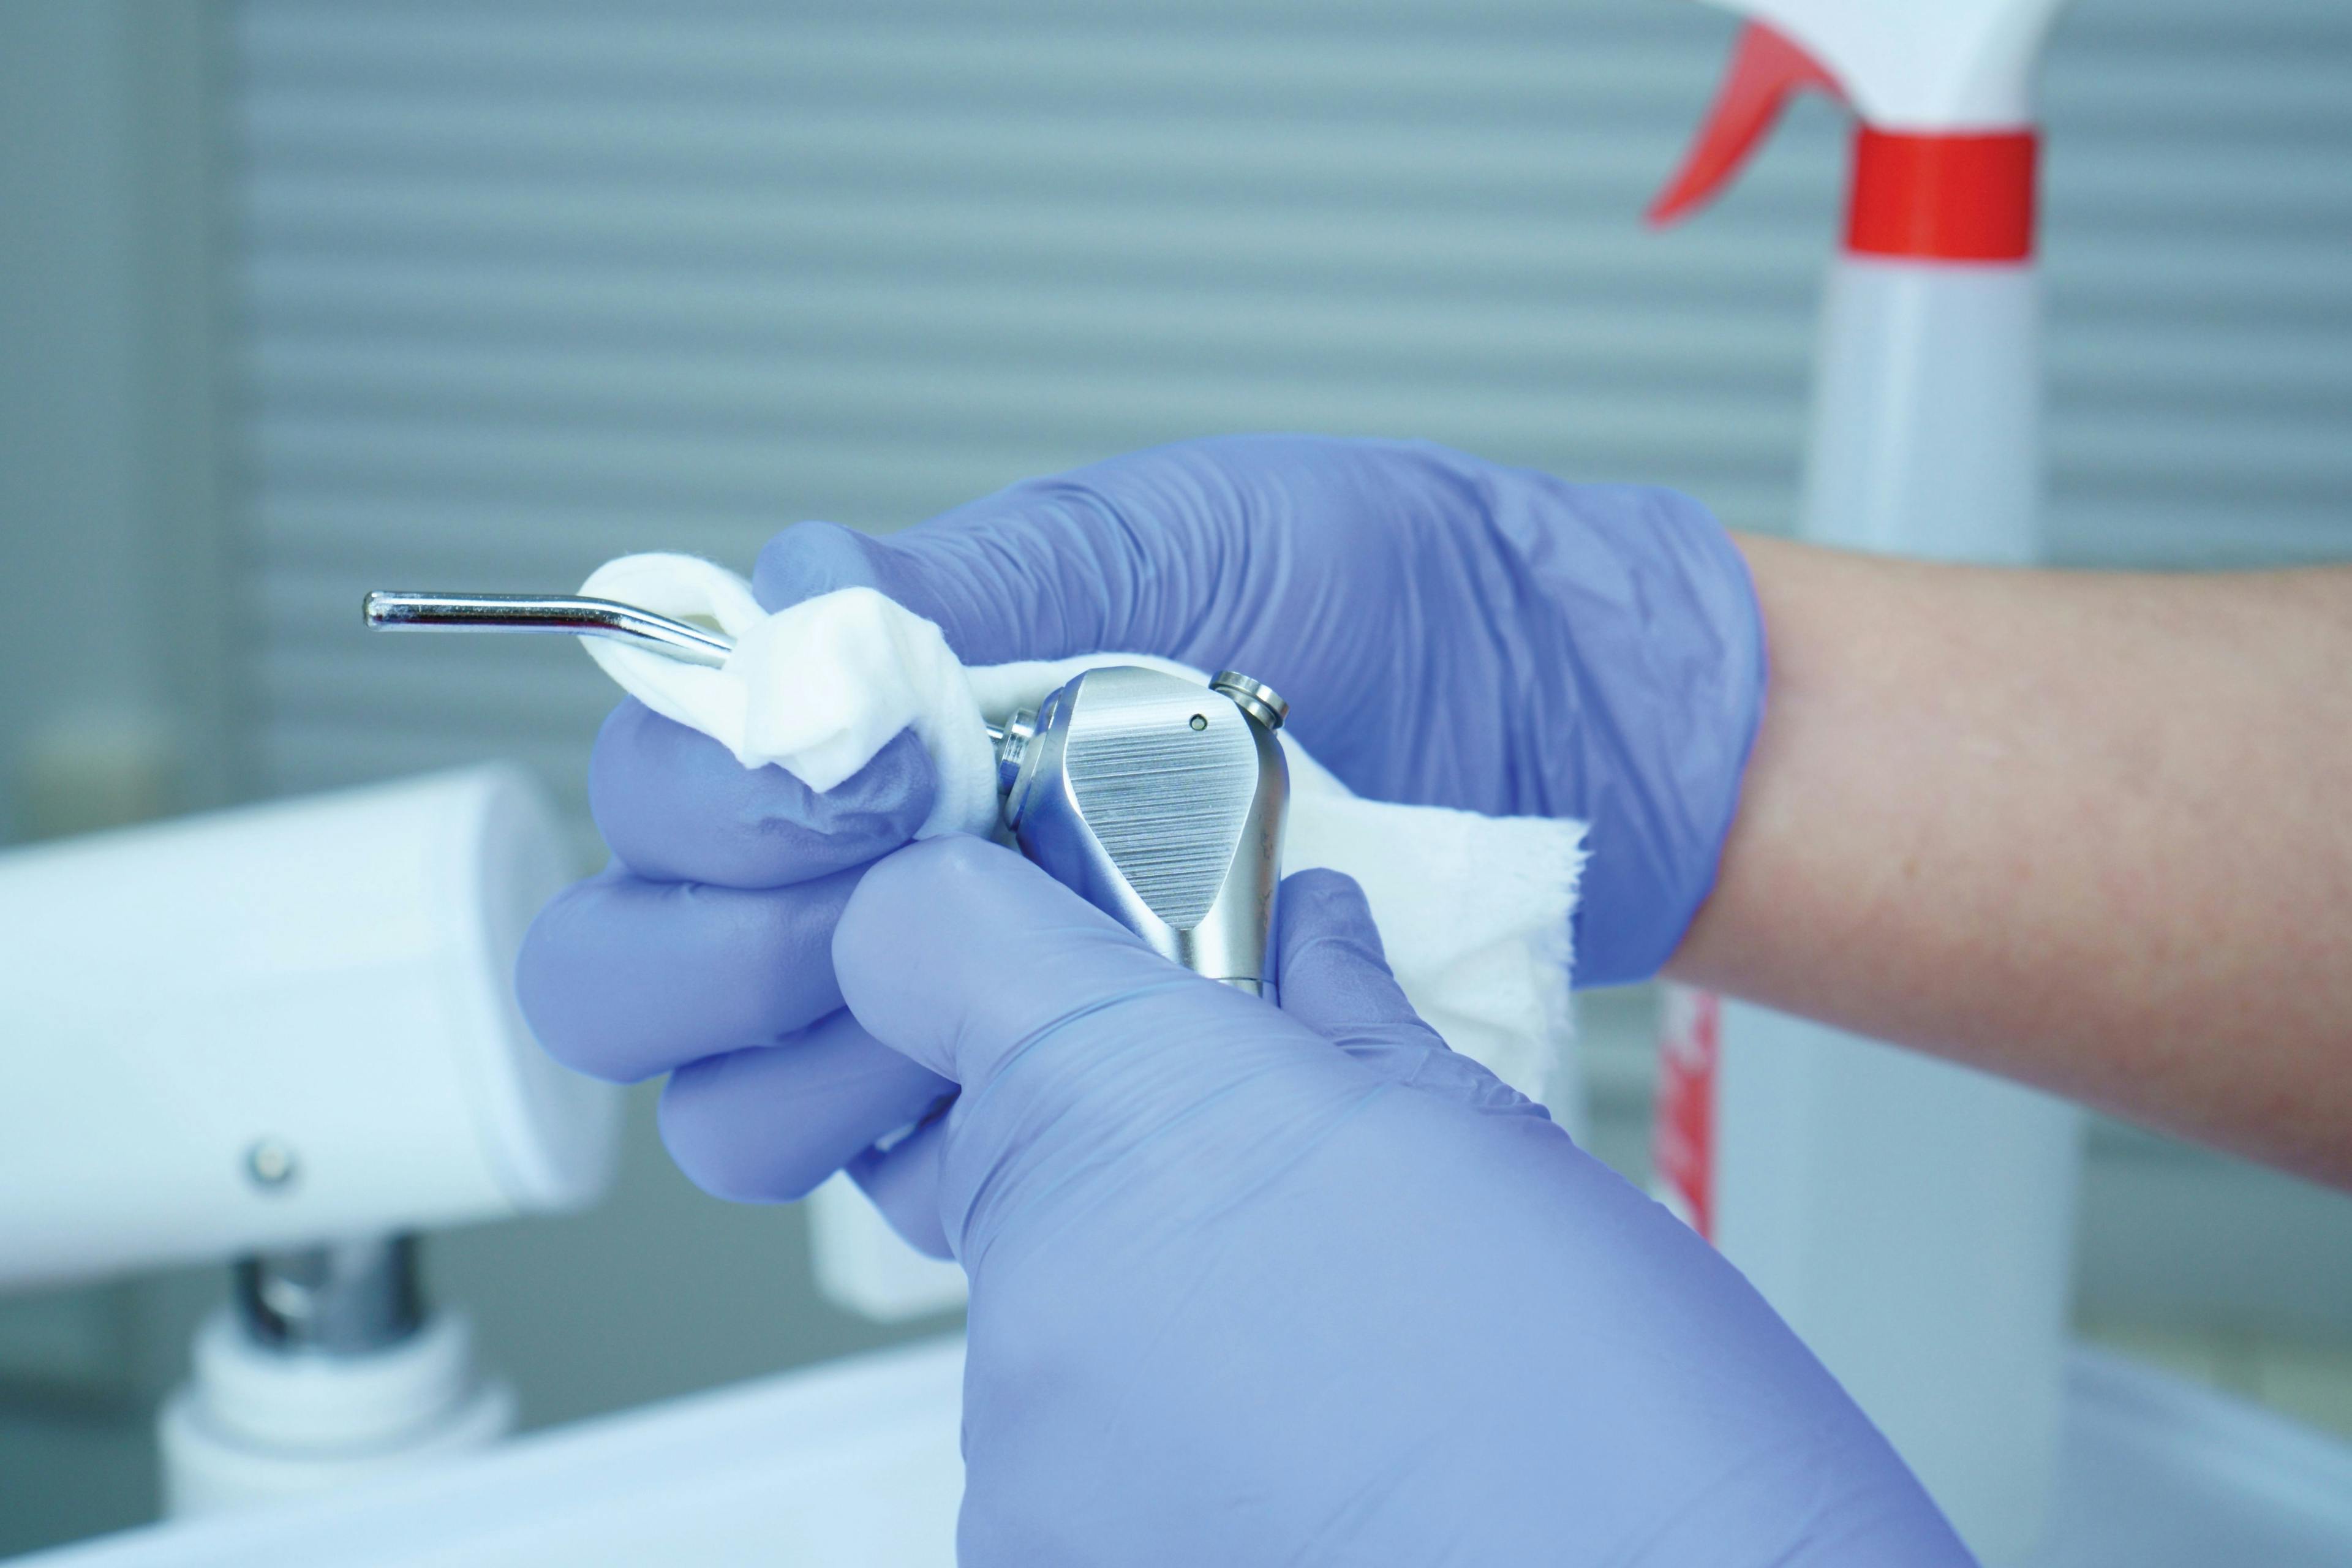 Dental infection control product round-up